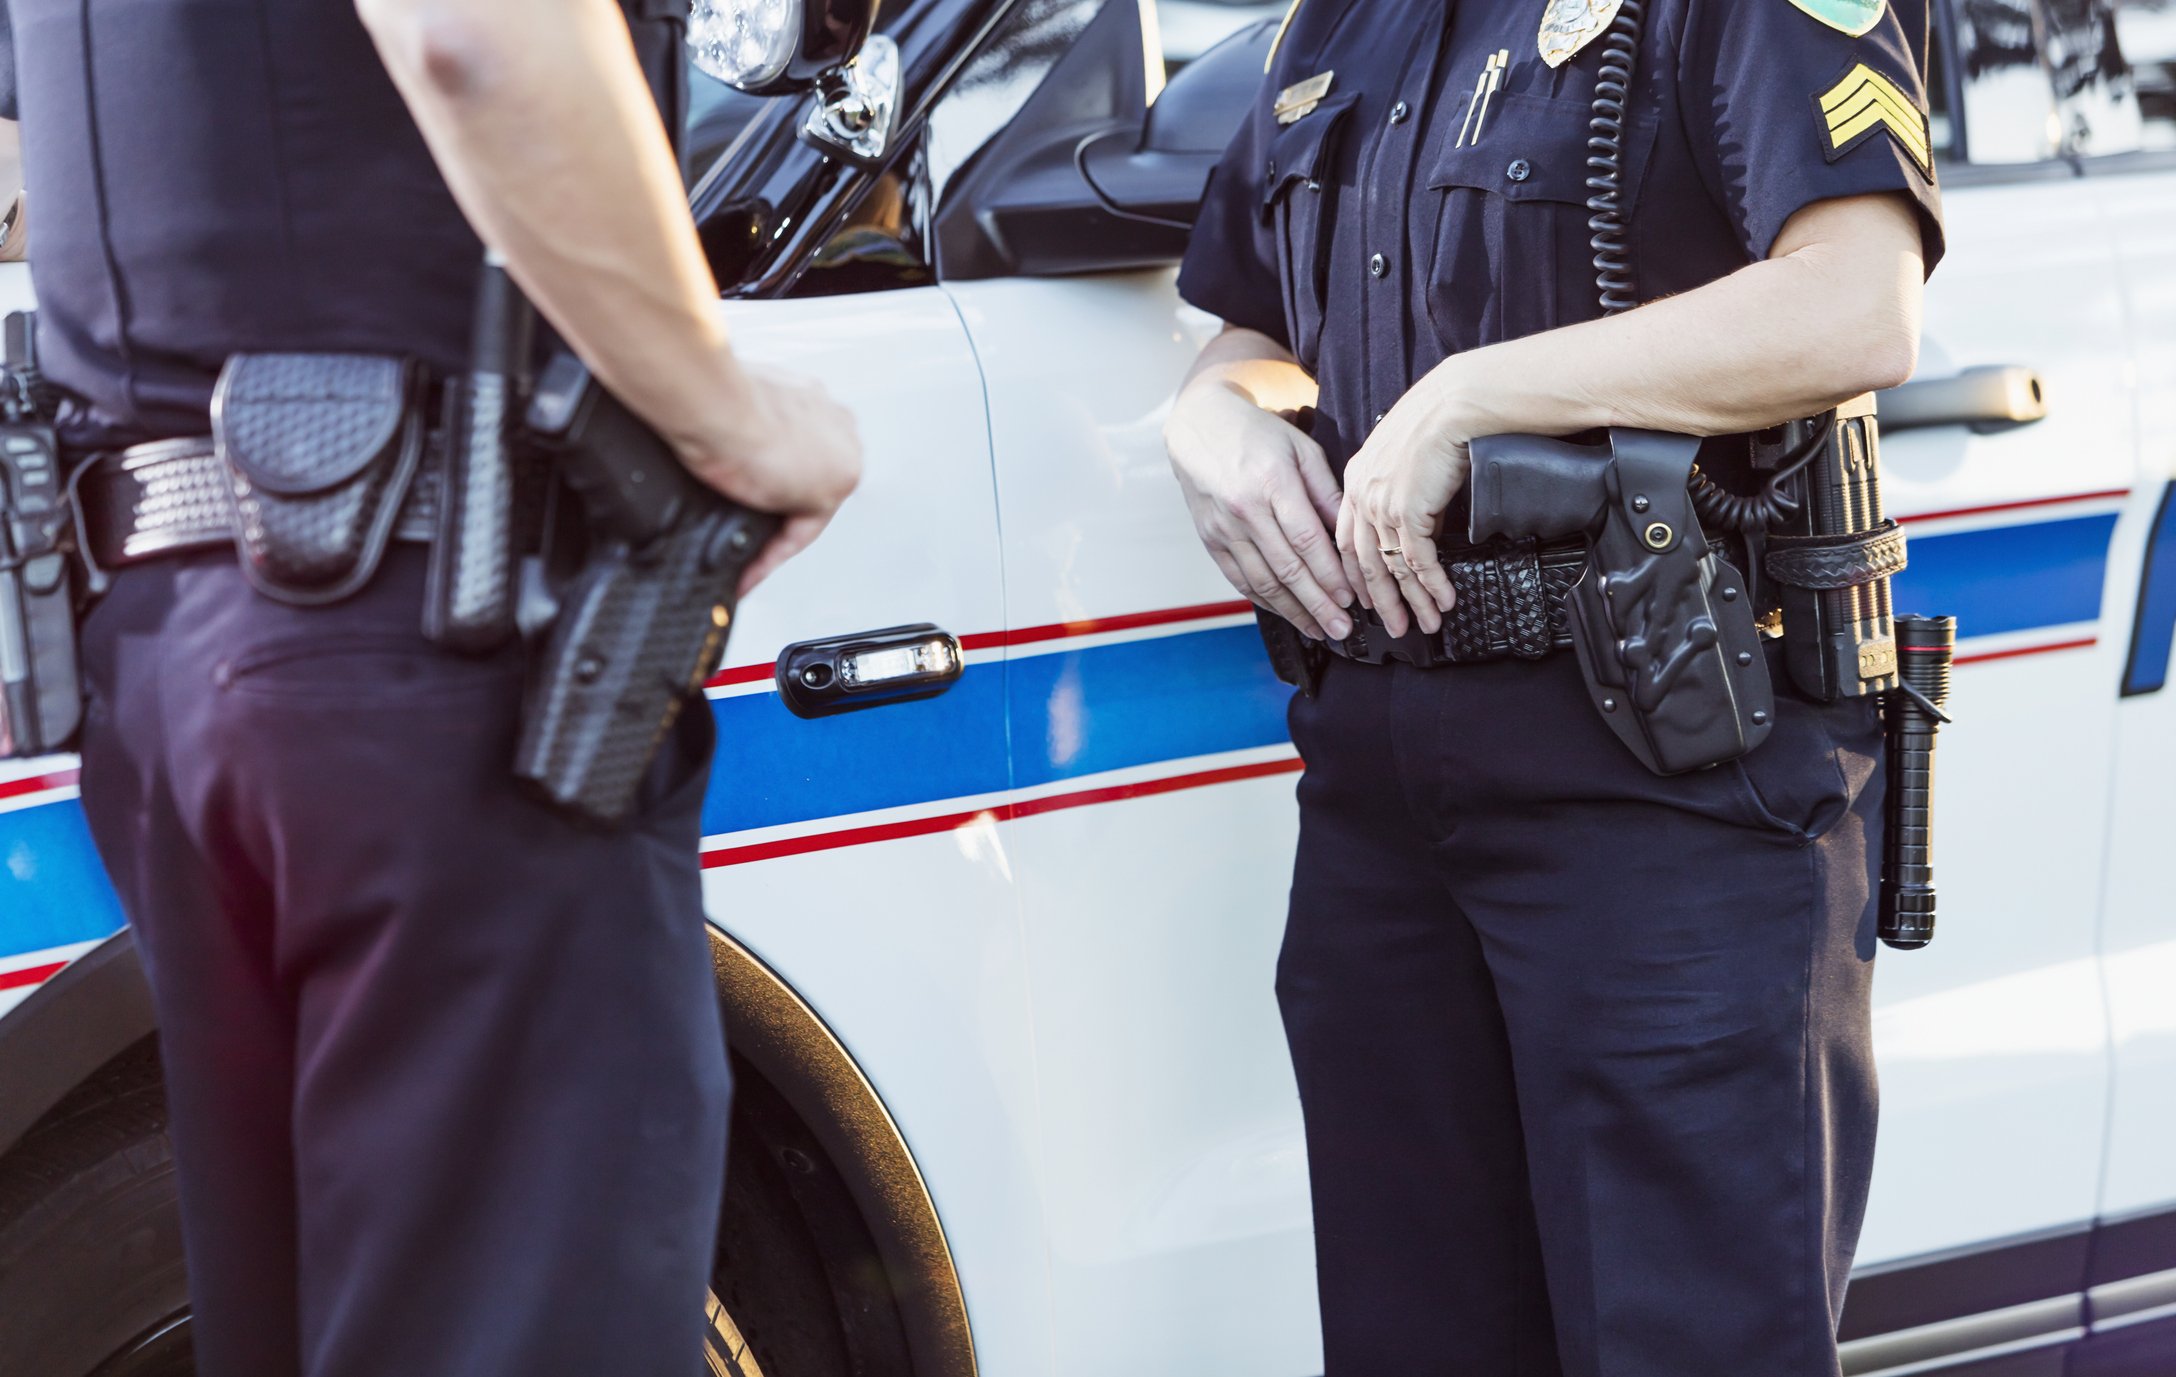 Jeffrey was a new police officer who was yet to gain the respect of his fellow officers. | Photo: Pexels